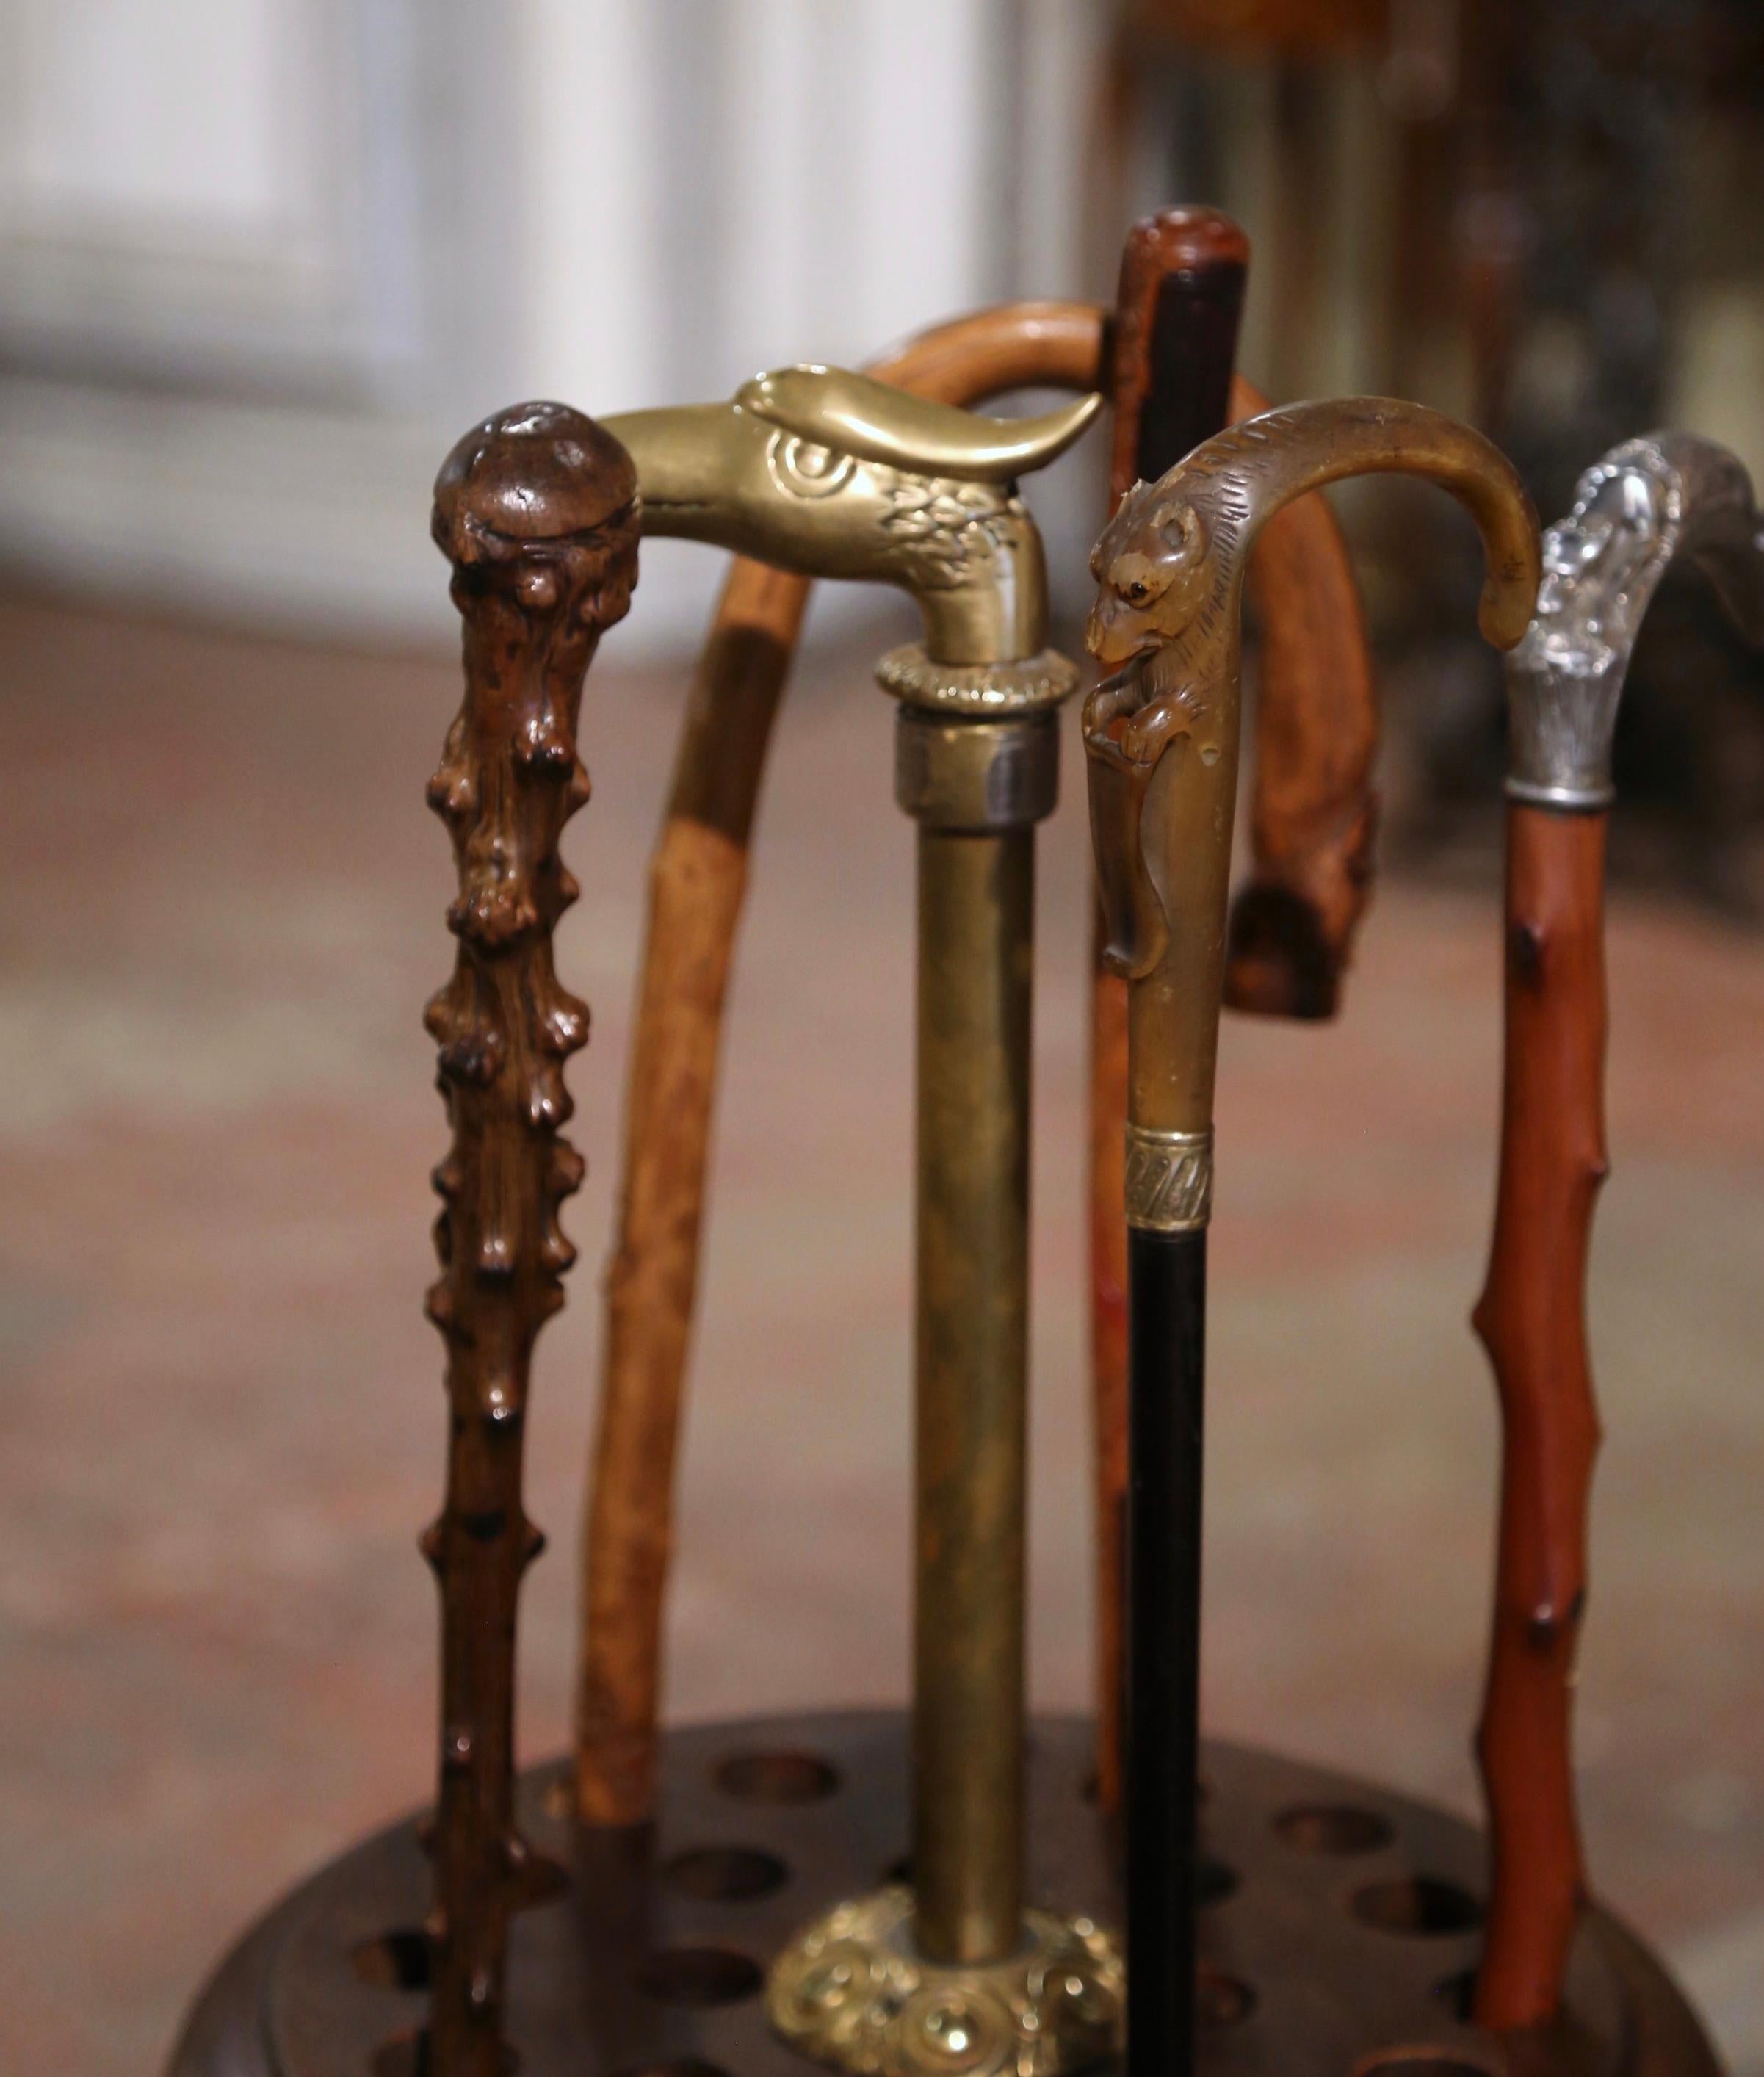 Early 20th Century French 24-Cane Holder with Brass Eagle Handle and 5 Canes In Excellent Condition For Sale In Dallas, TX